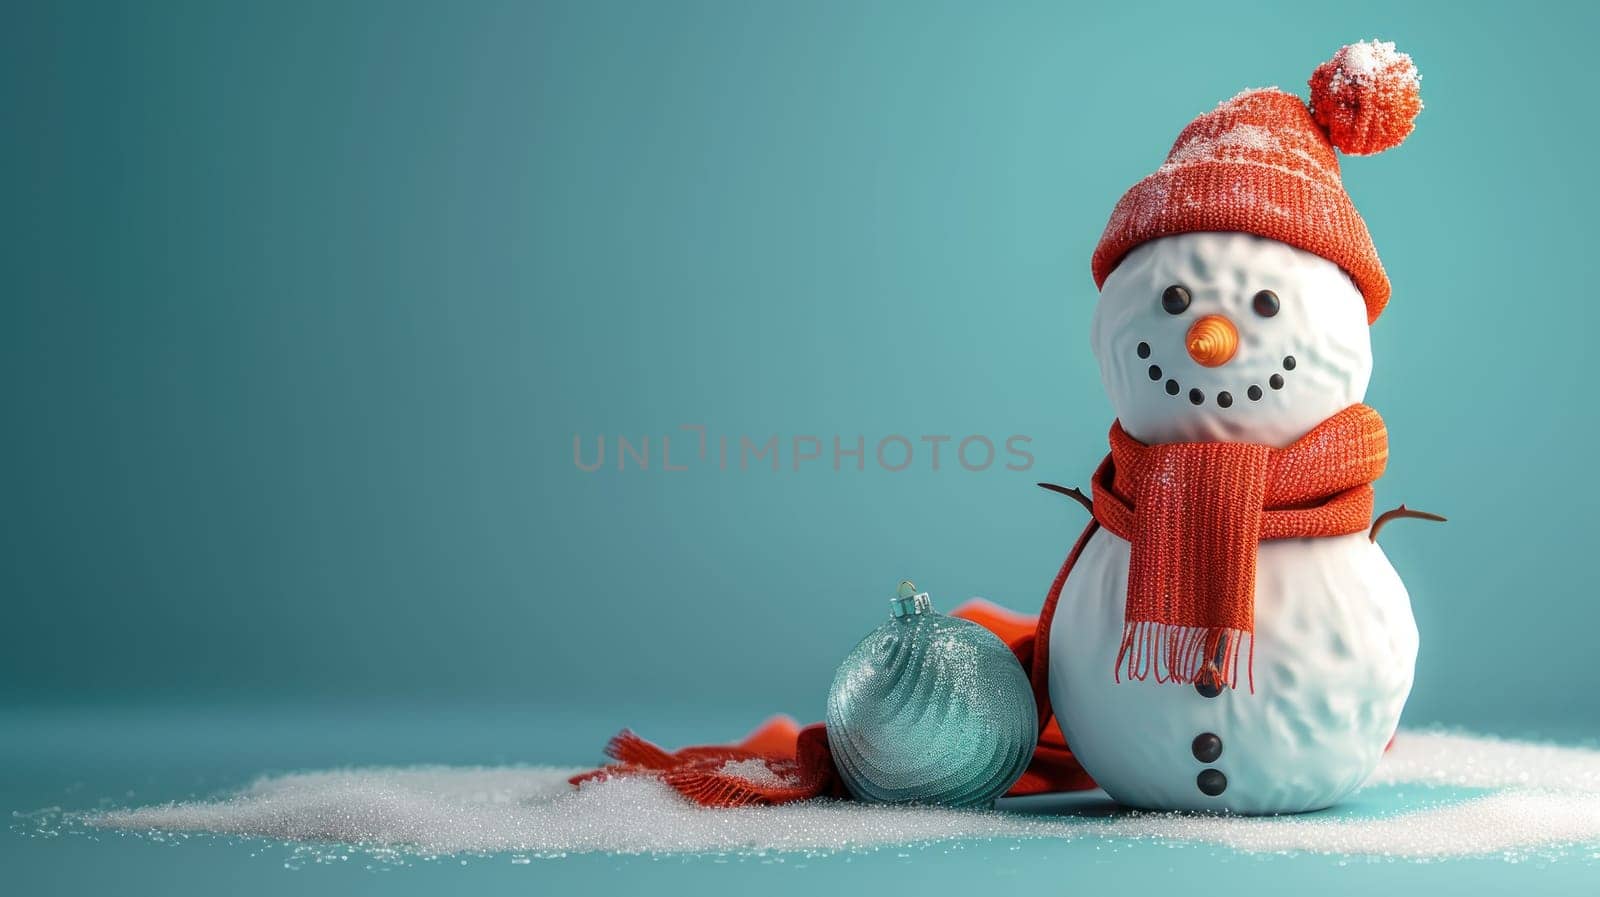 A snowman standing sideways on a solid background.